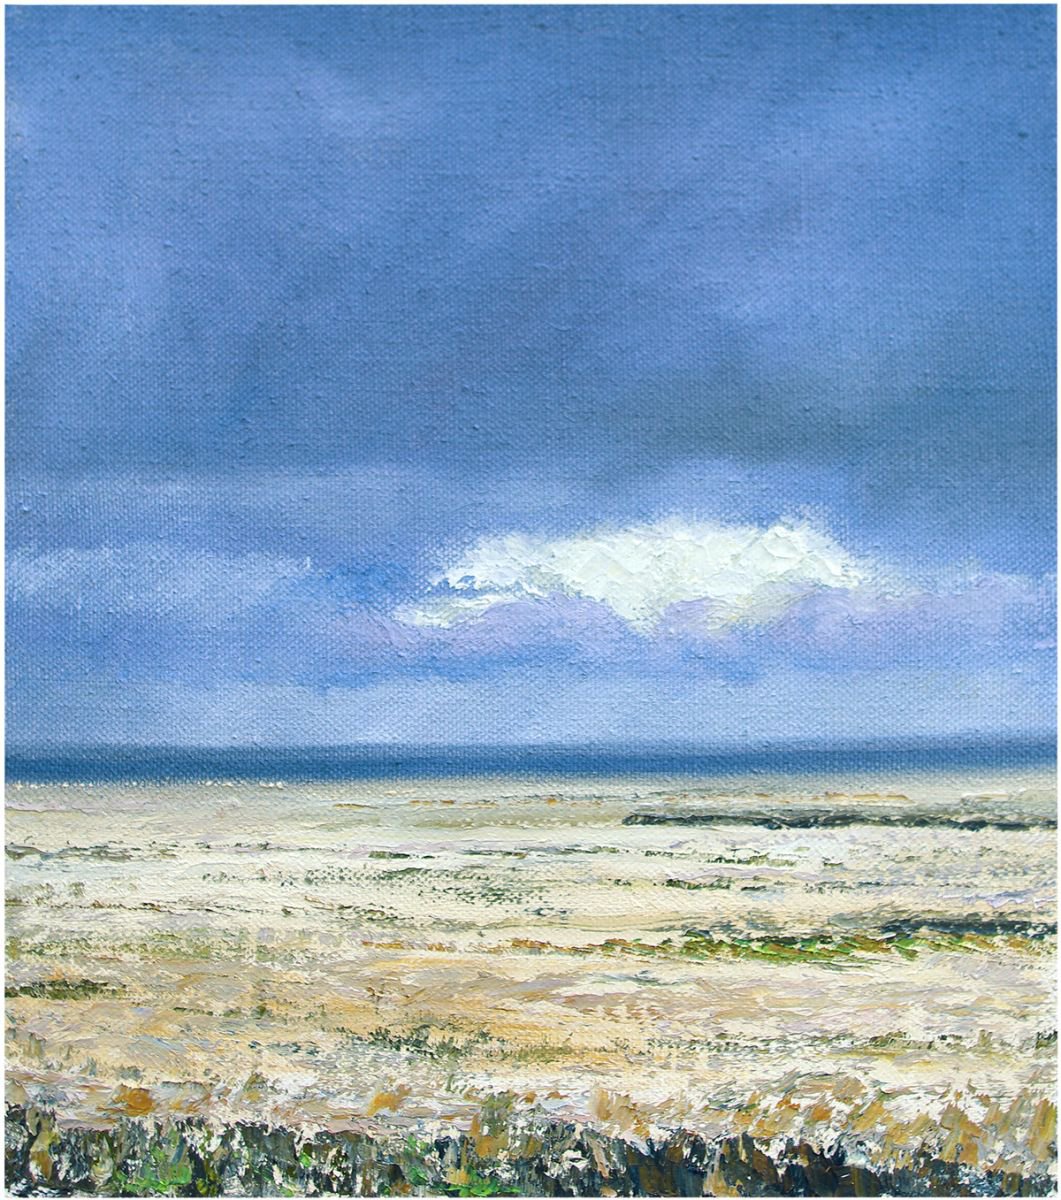 STORM APPROACHING by Richard Manning